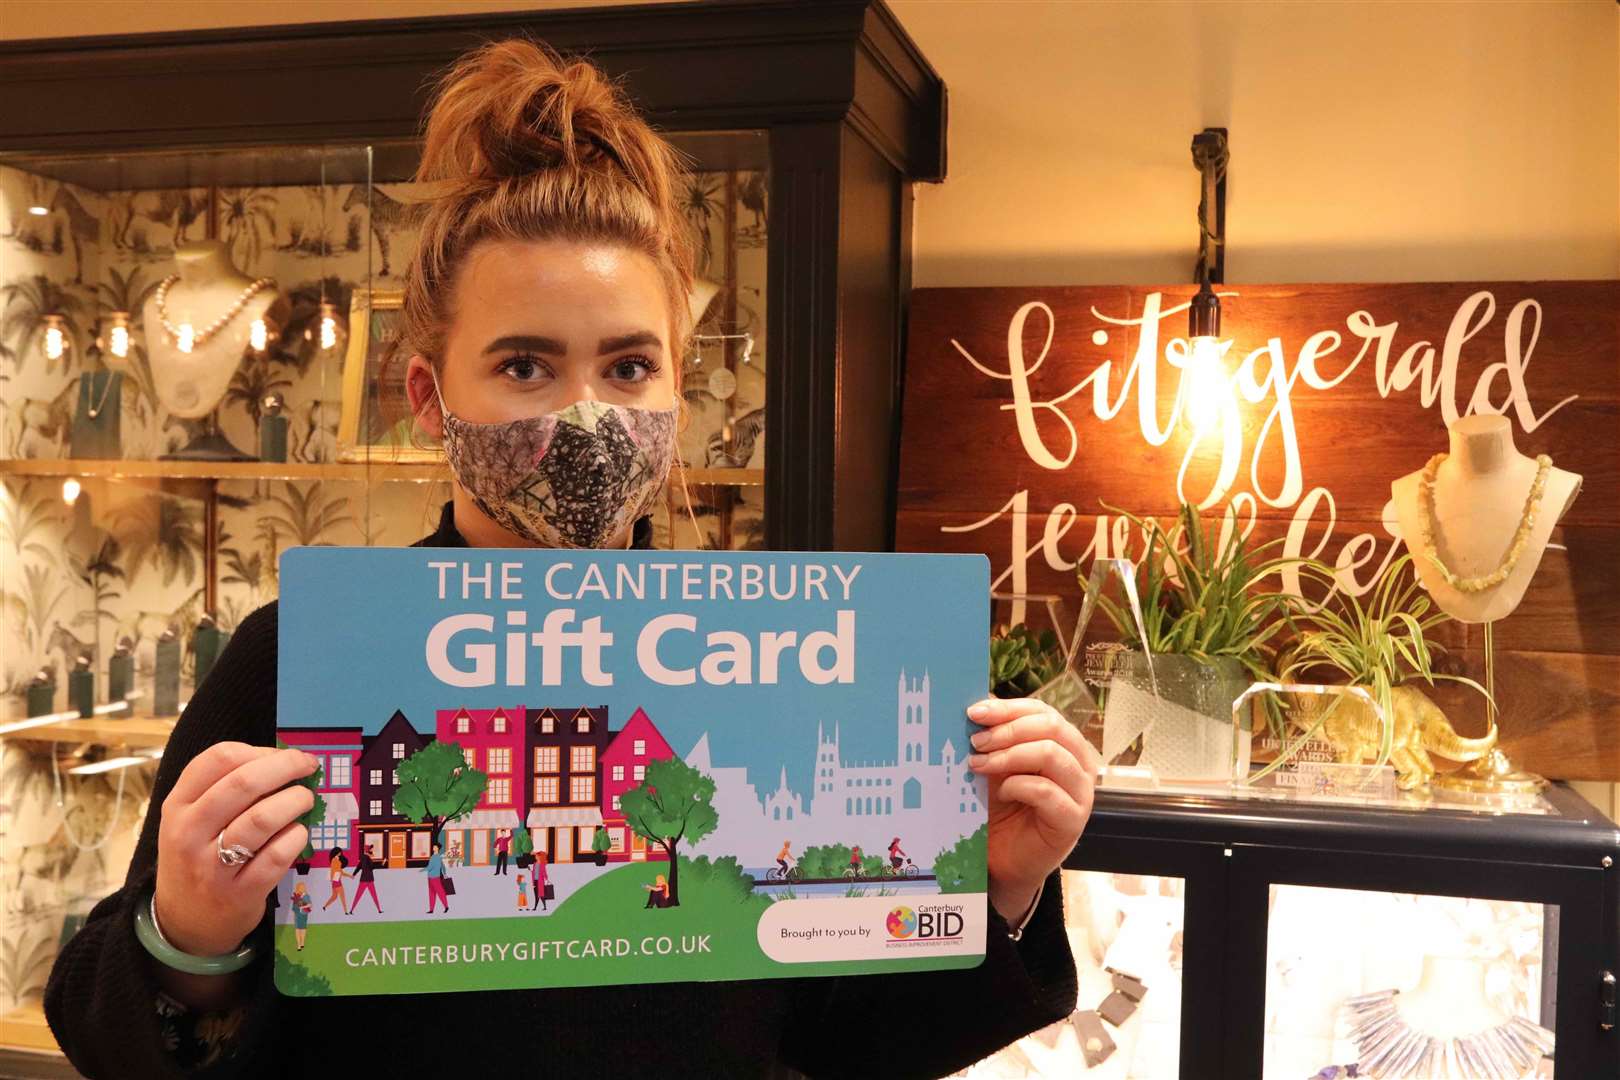 80 businesses have signed up to the gift card scheme